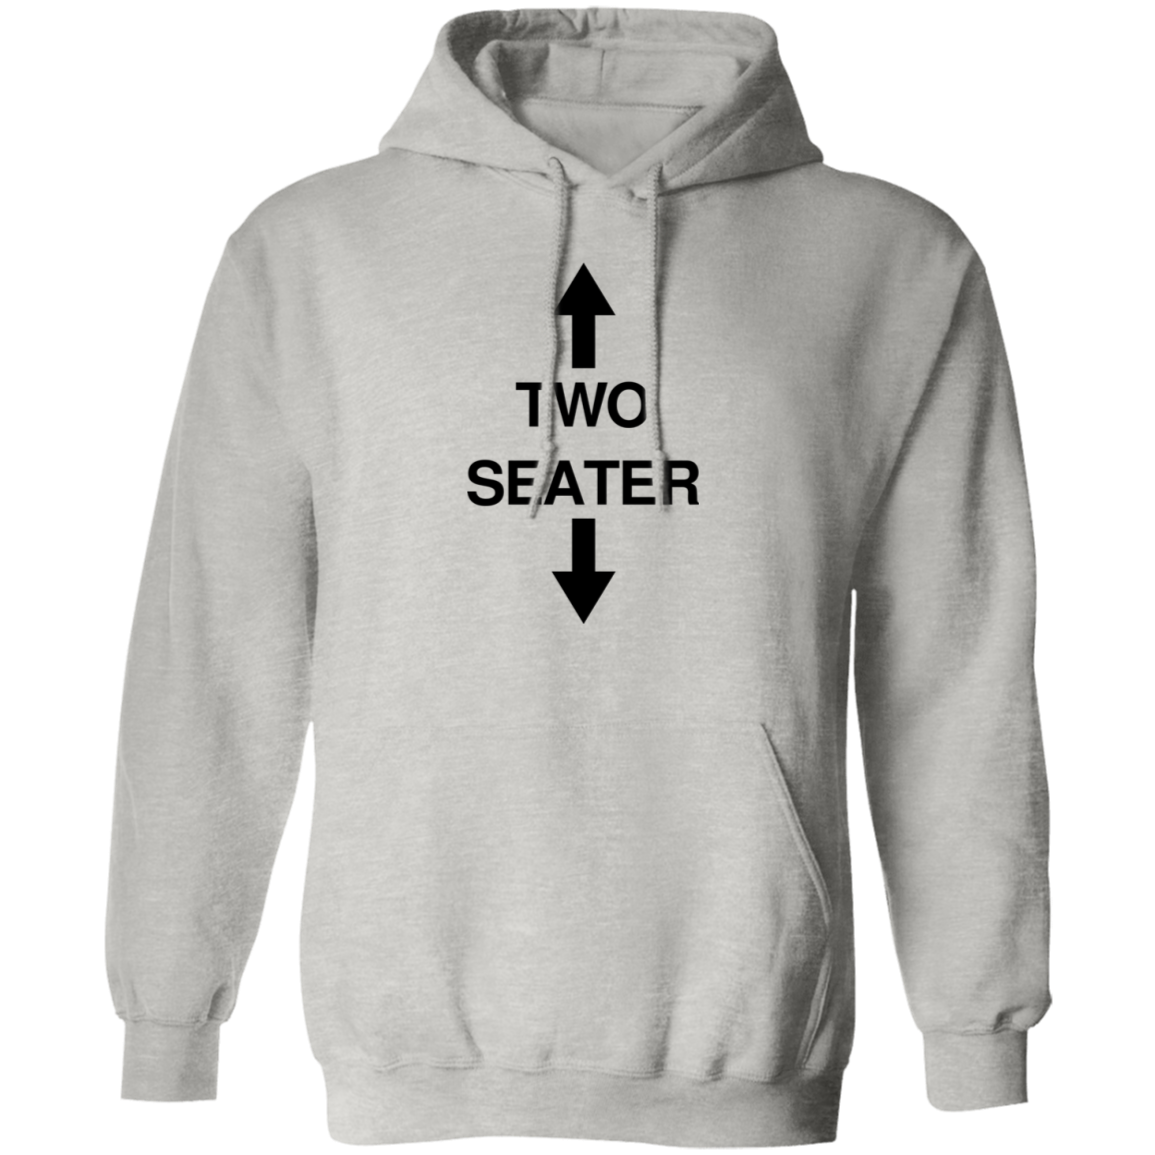 "Two Seater" Hoodie